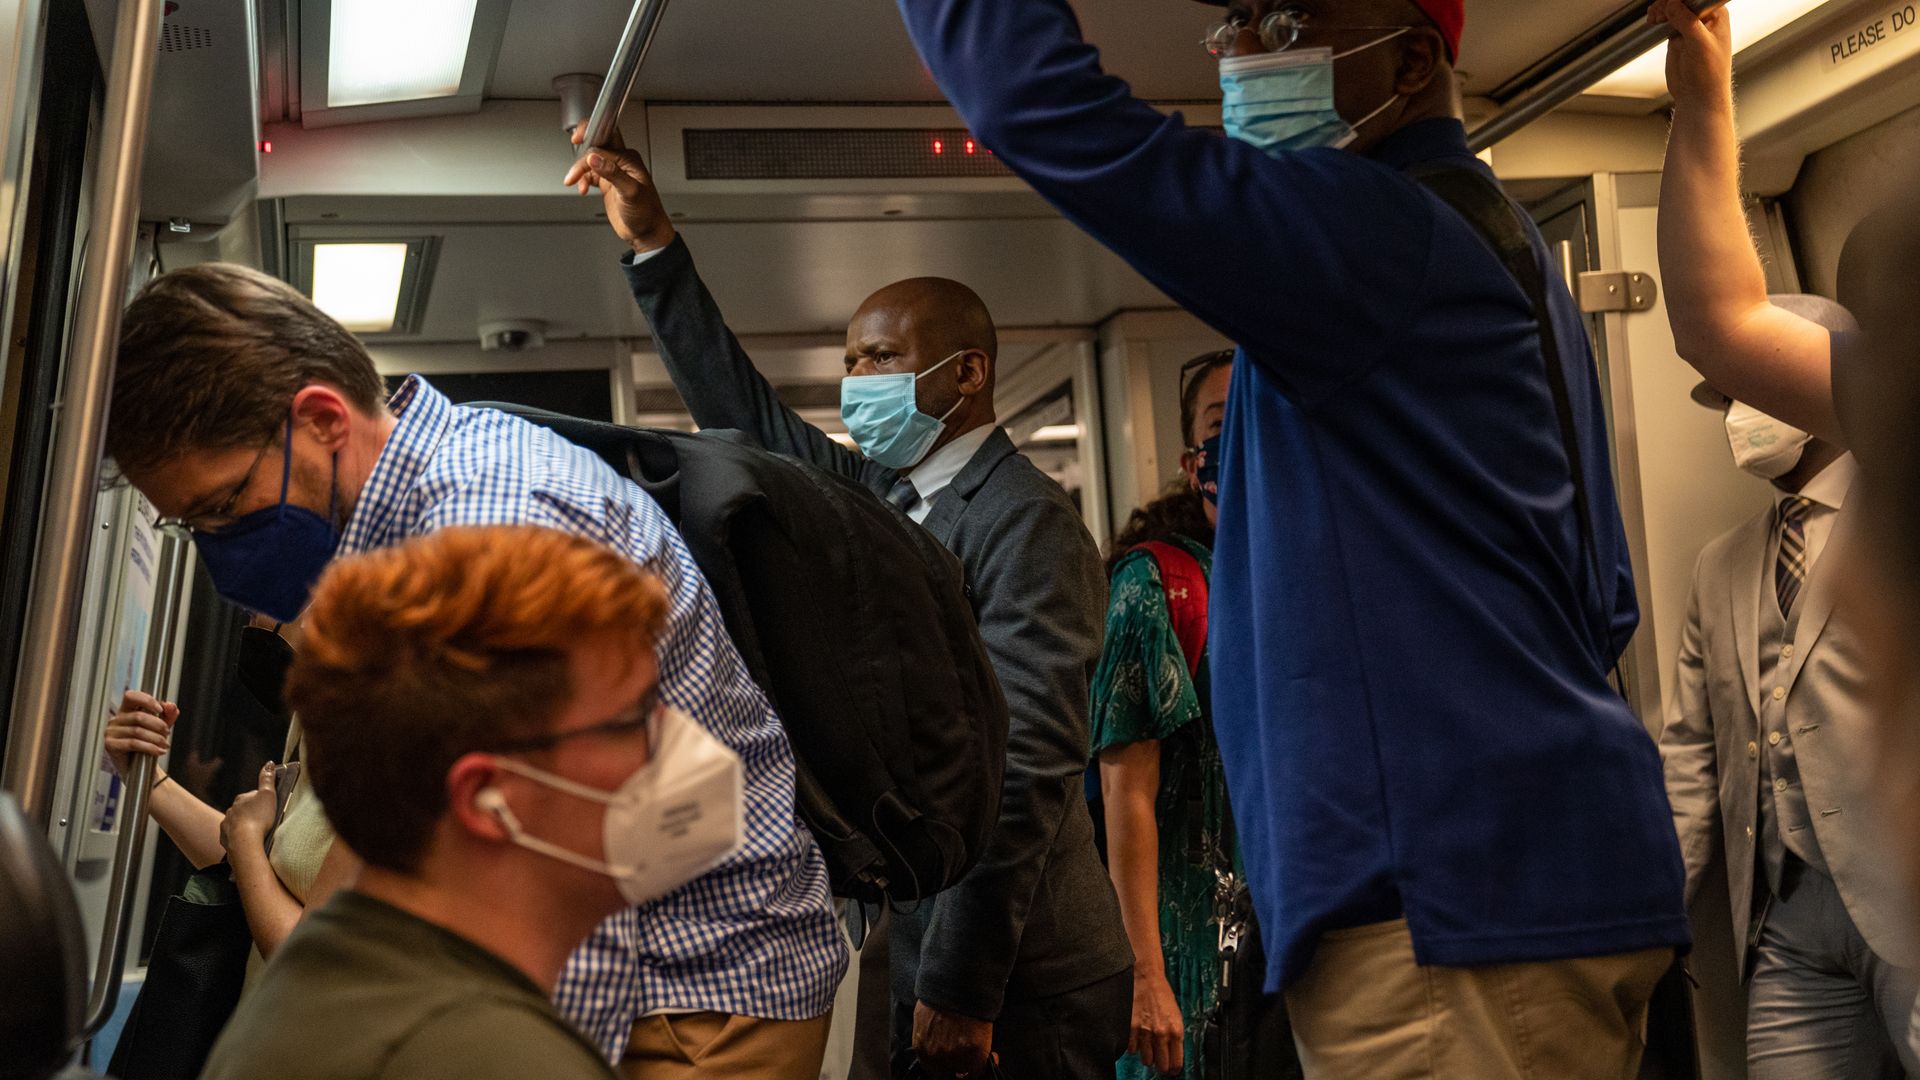  Commuters wearing masks travel on the Metro.